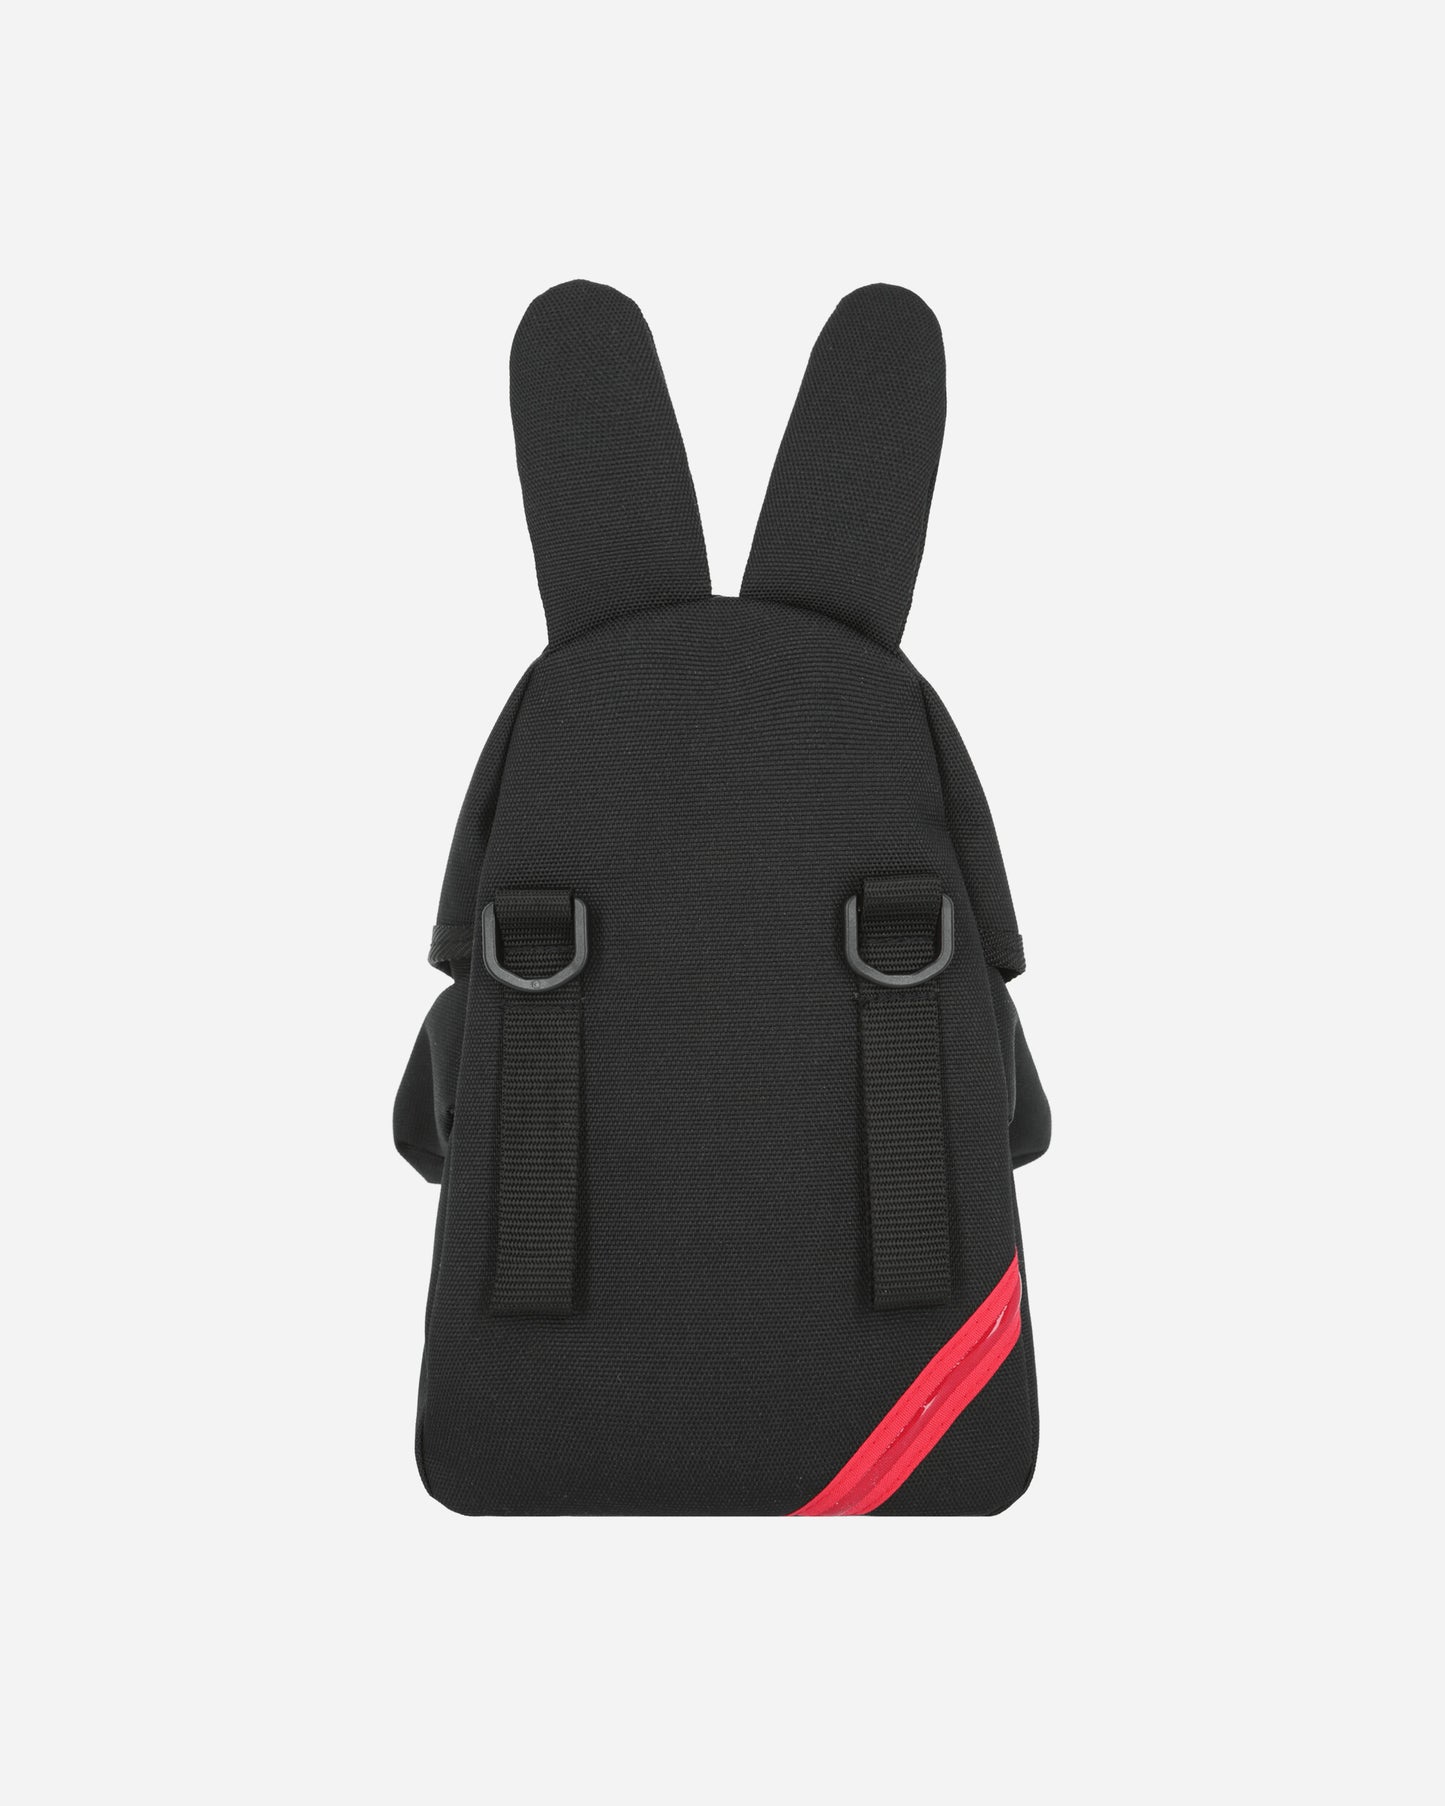 Phingerin Rabbit Pouch Black Bags and Backpacks Pouches PD-241-BG-041 C1